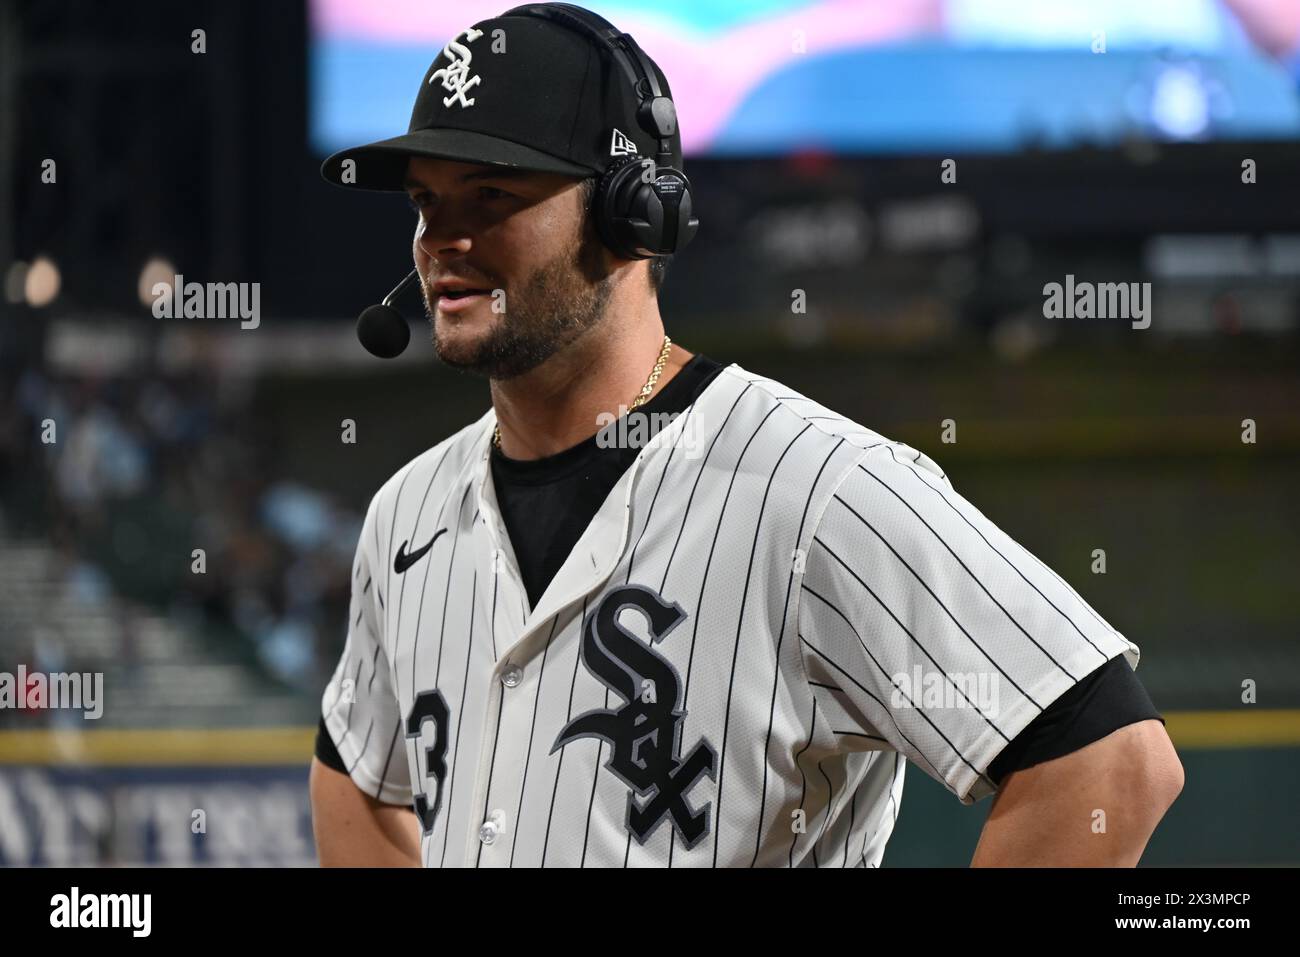 Chicago, United States. 27th Apr, 2024. Andrew Benintendi #23, professional baseball outfielder for the Chicago White Sox participates in a post-game interview after batting a two-run walk-off home run to win it for the Chicago White Sox in extra innings during the Major League Baseball game matchup between the Tampa Bay Rays and Chicago White Sox at Guaranteed Rate Field. For the first time all season, the Chicago White Sox have won two games in a row. Final score; Tampa Bay Rays 7 : 8 Chicago White Sox. Credit: SOPA Images Limited/Alamy Live News Stock Photo